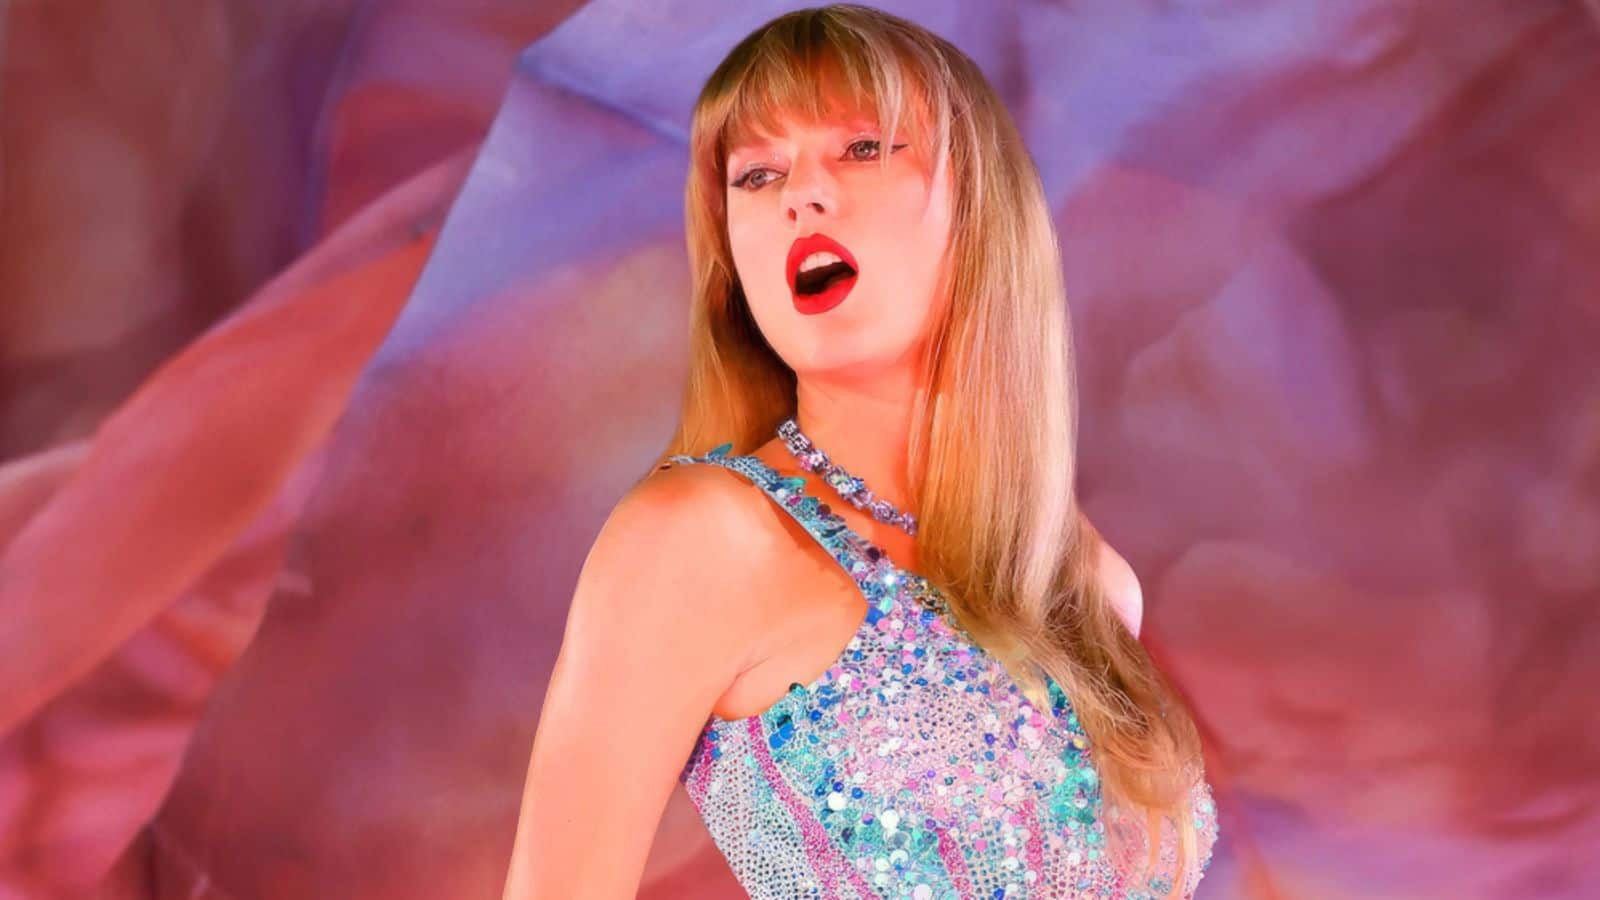 Taylor Swift's music returns to TikTok after licensing dispute